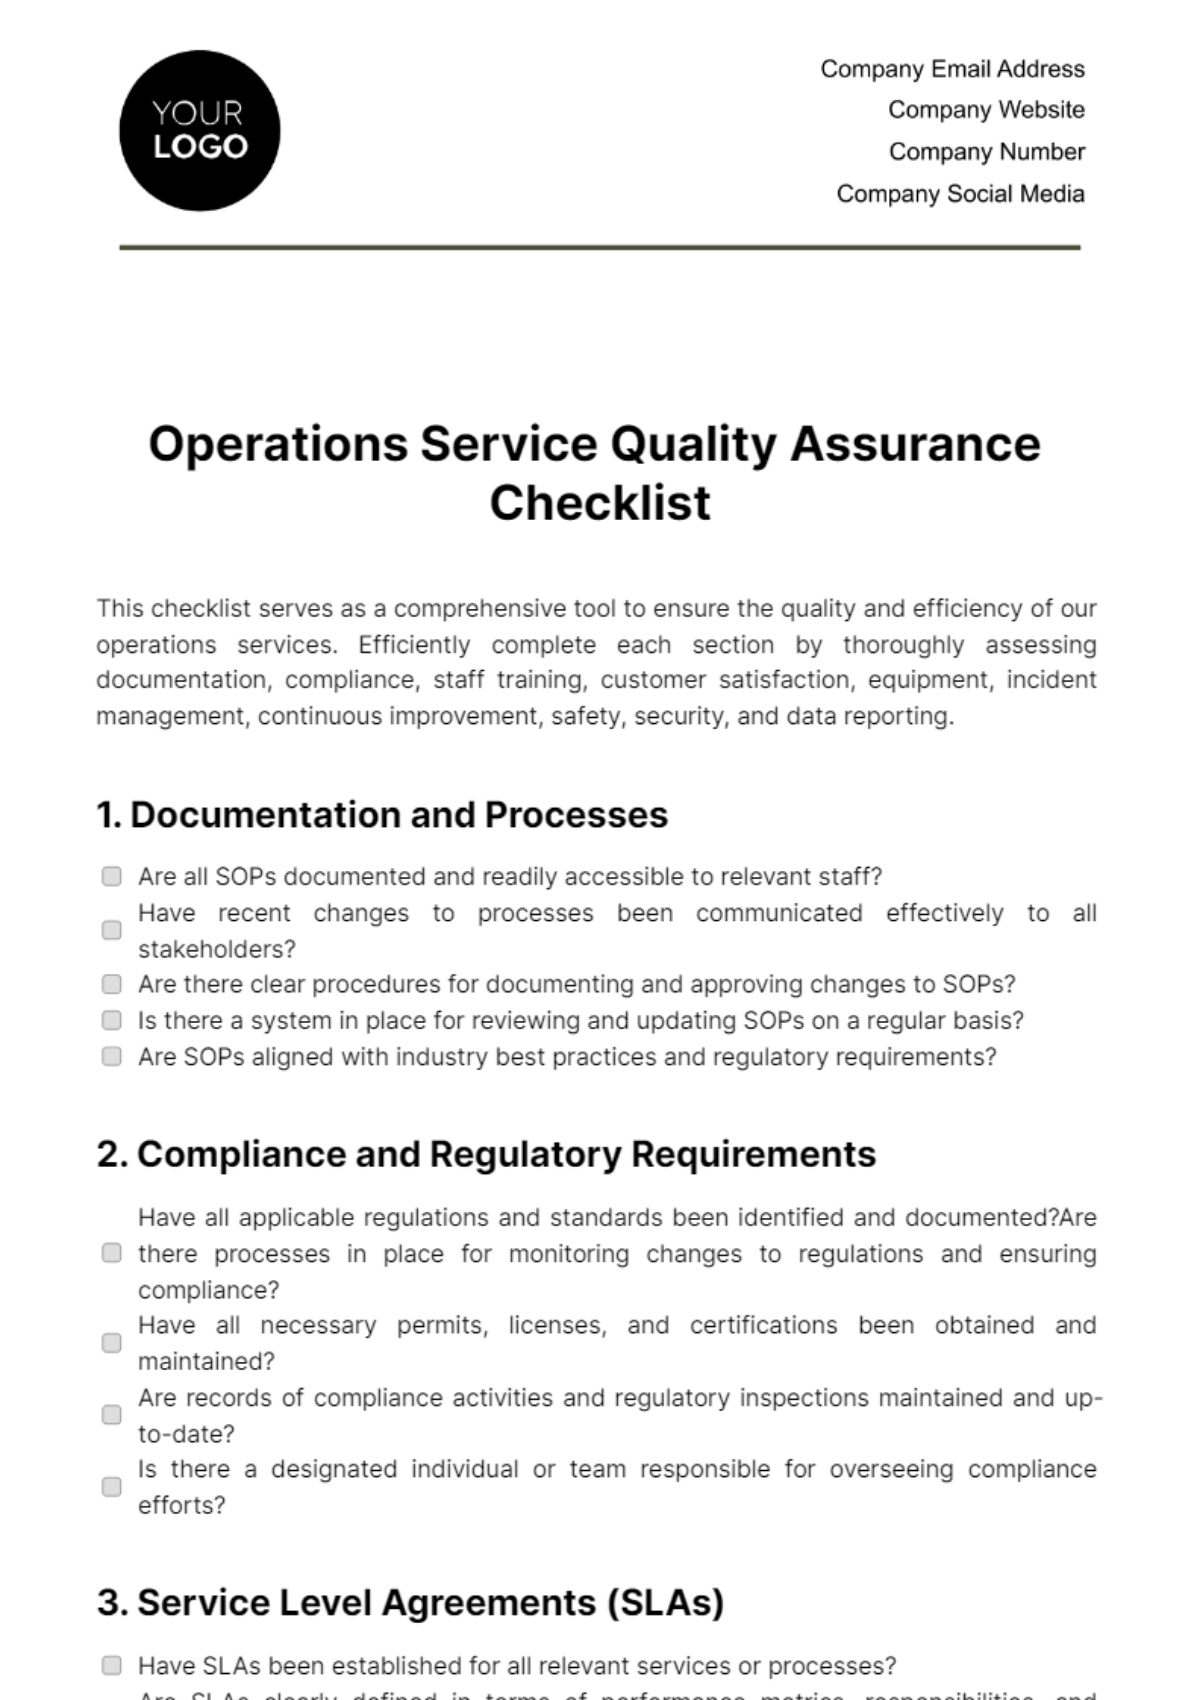 Free Operations Service Quality Assurance Checklist Template